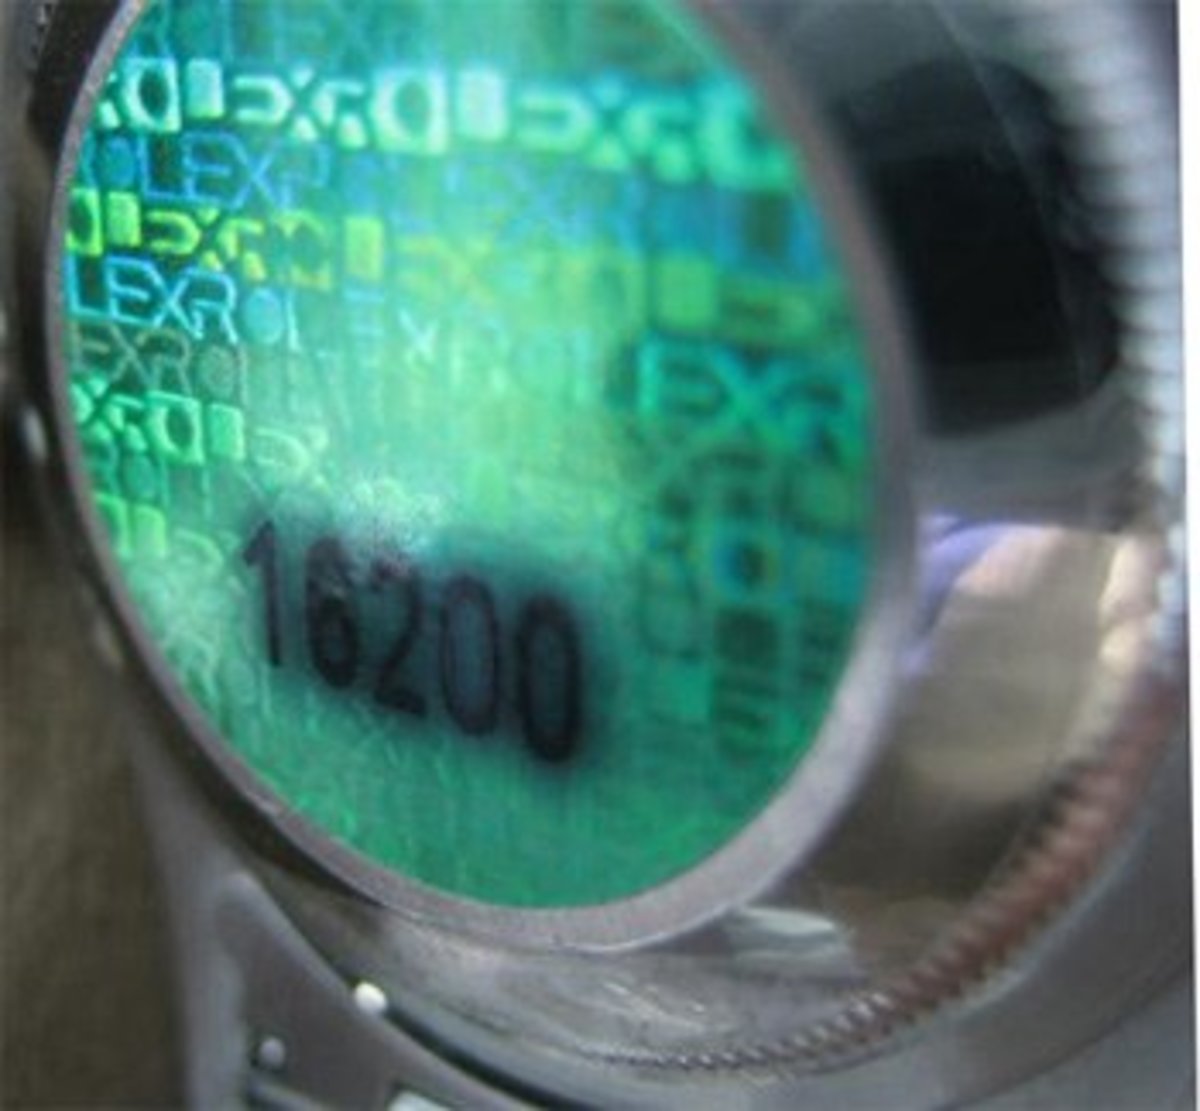 An official Rolex hologram on the back of a Datejust.